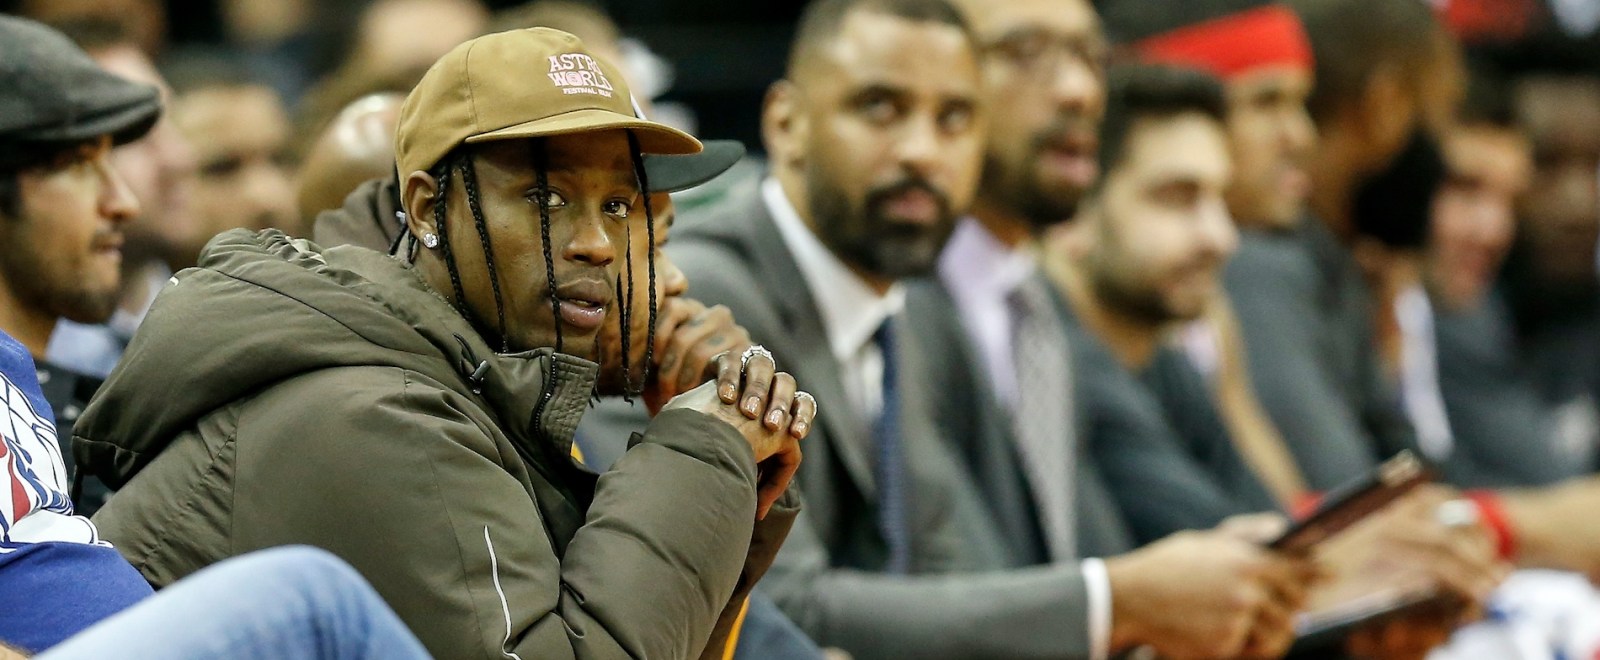 Travis Scott deleted his Instagram account after fans BASHED his